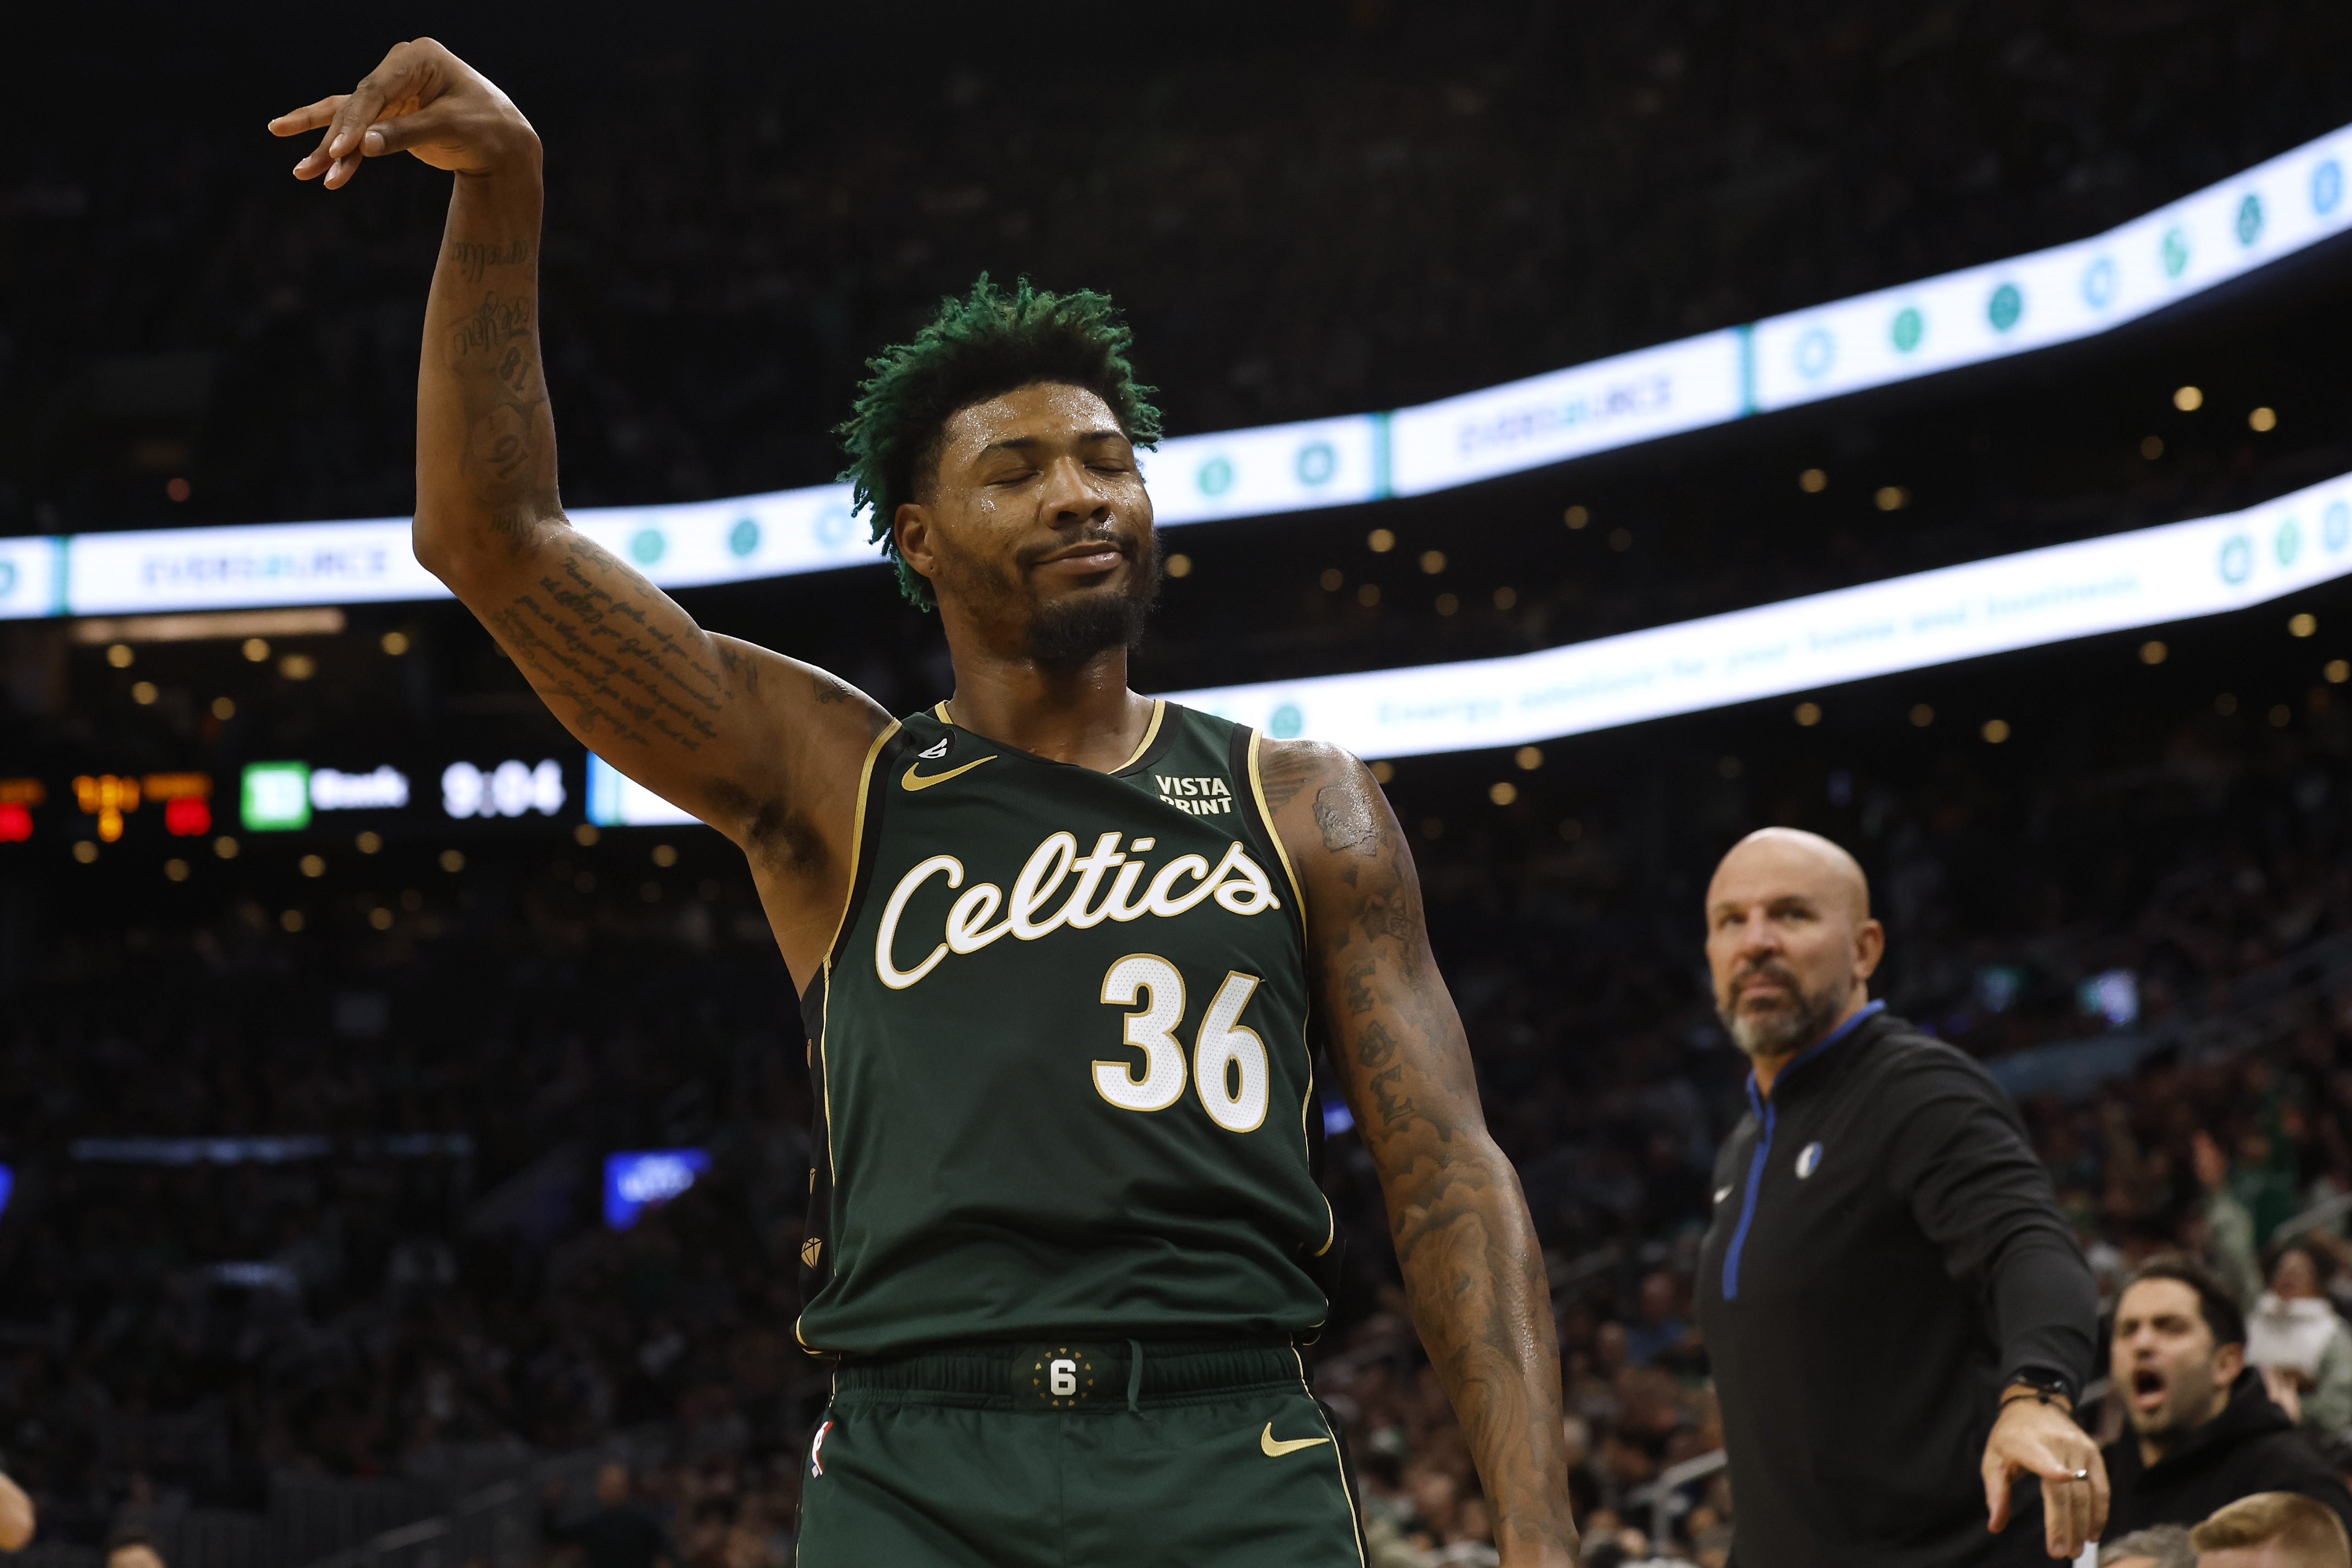 Marcus Smart of the Boston Celtics smiles at the Dallas Mavericks bench after hitting a three-point shot.